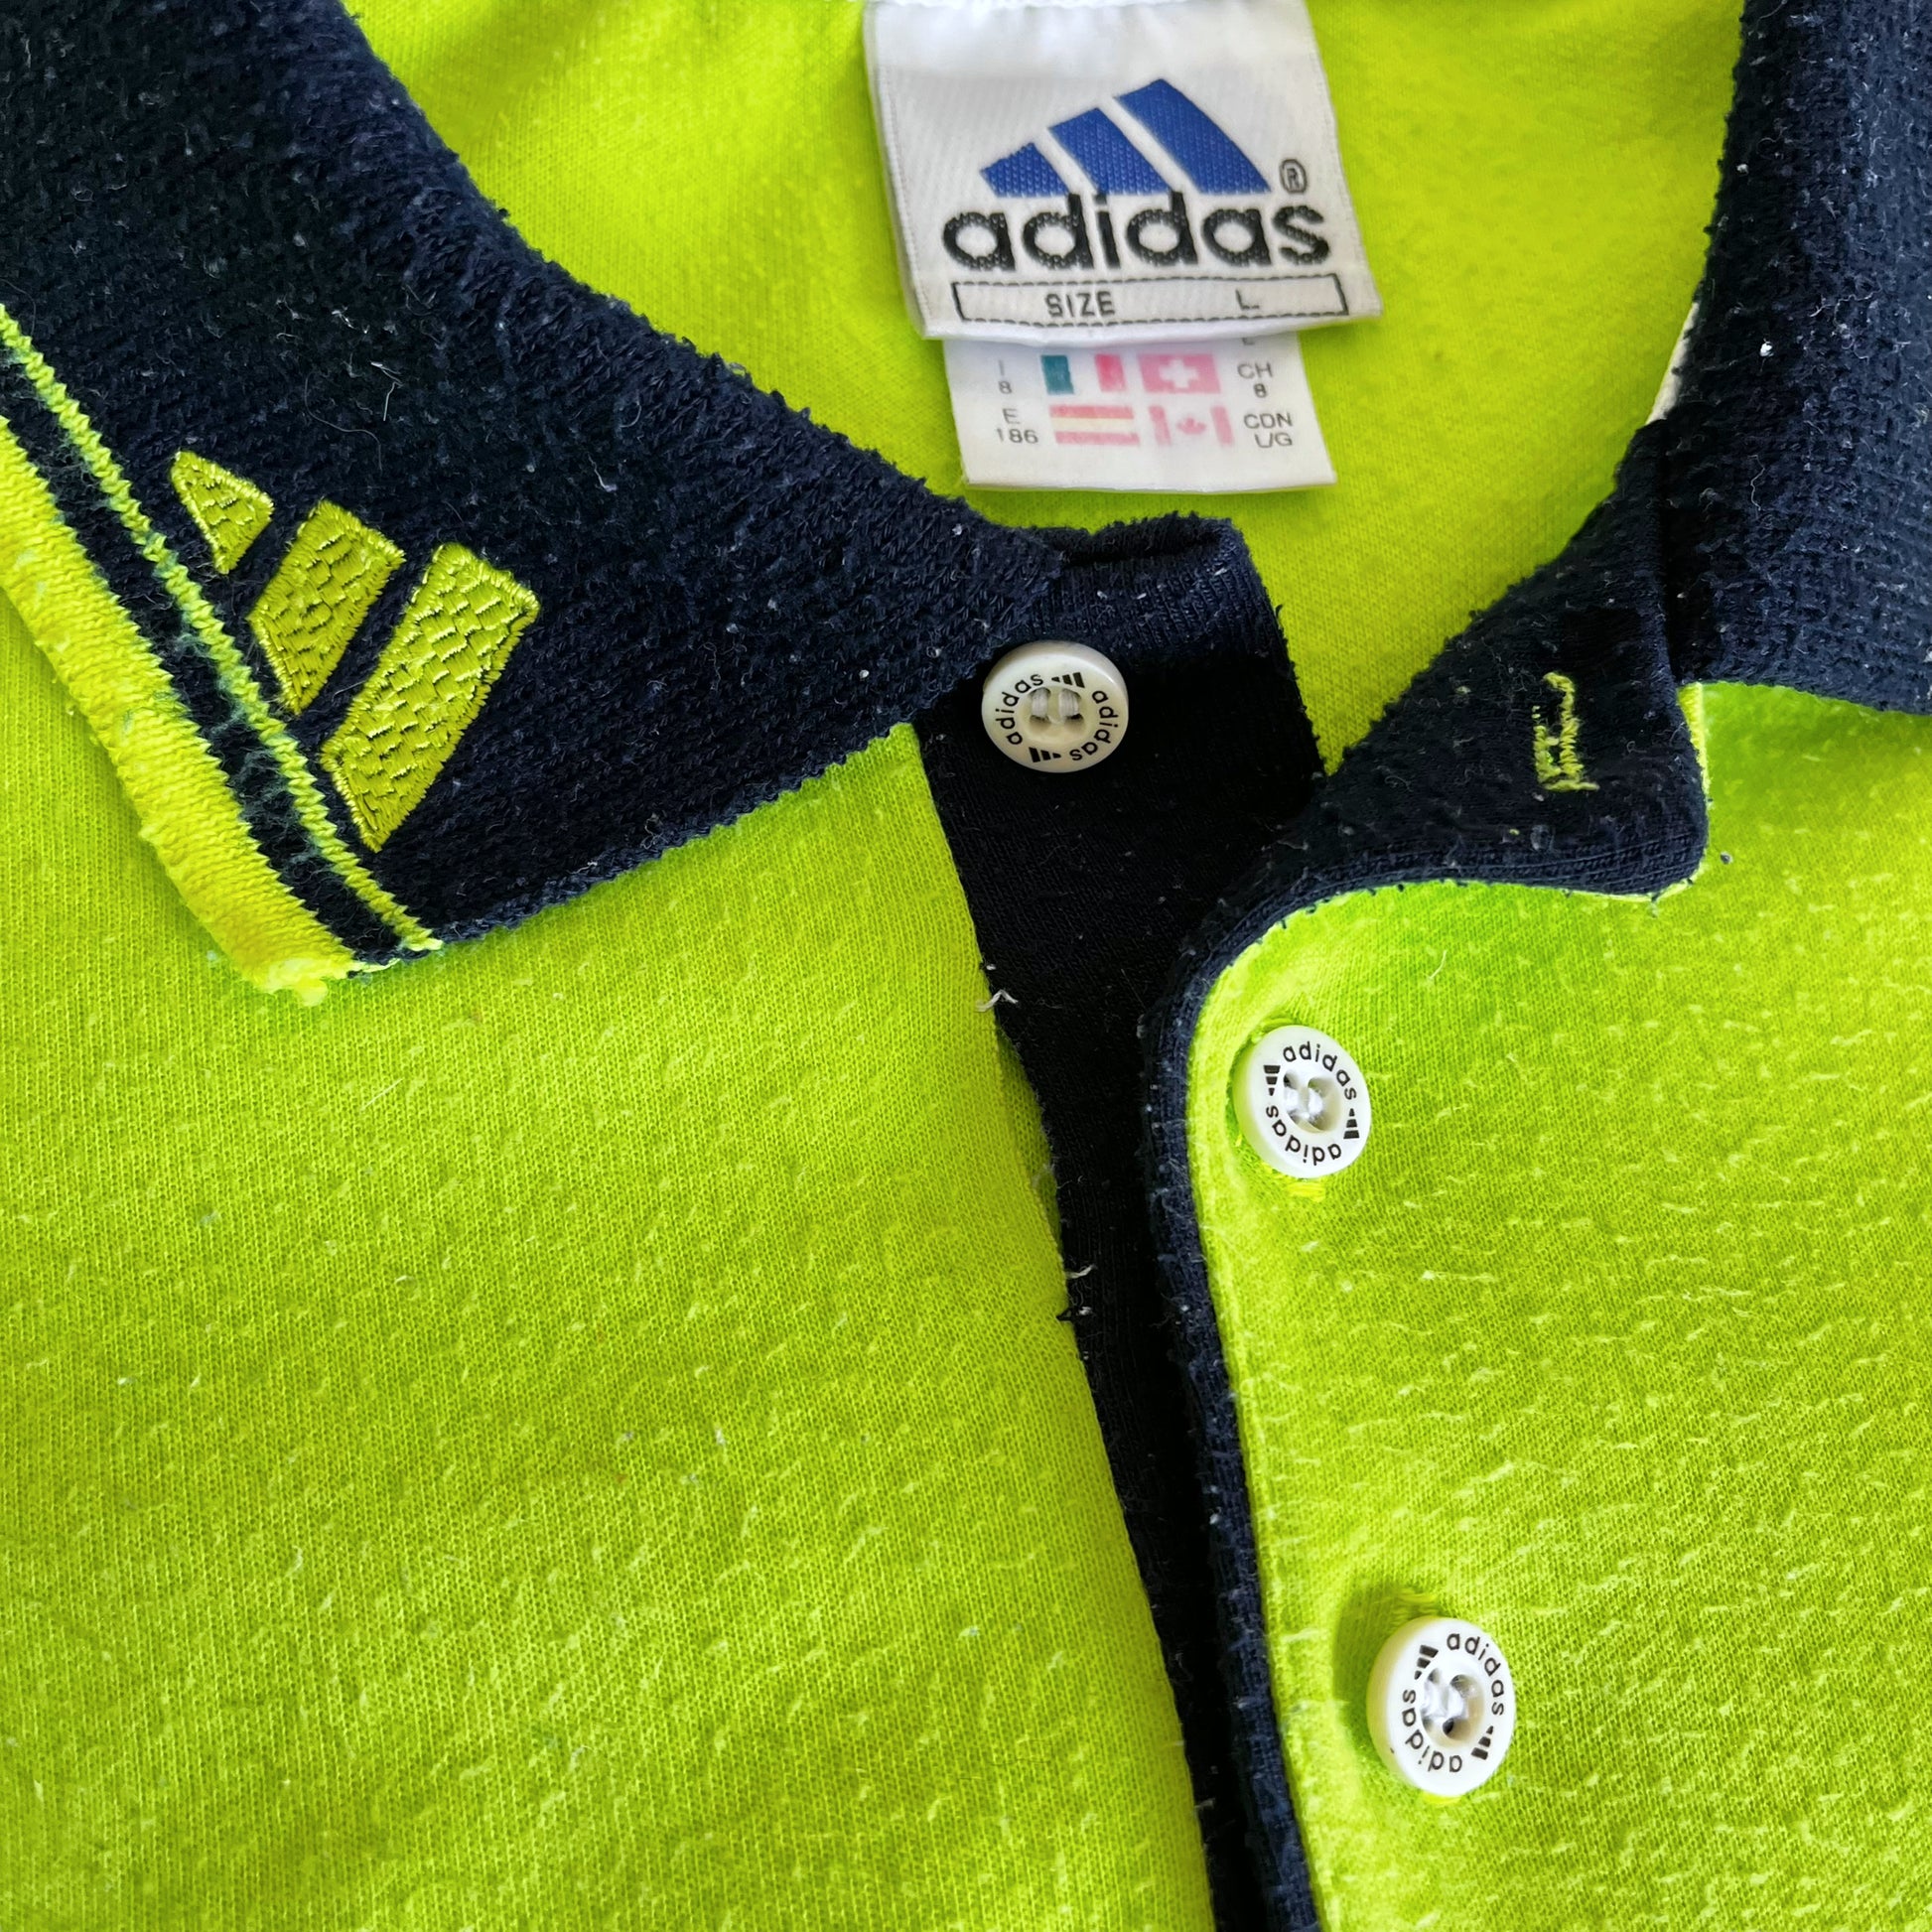 Vintage 90s Adidas Lime Green Rugby Shirt With Back Spell Out Rip - Casspios Dream